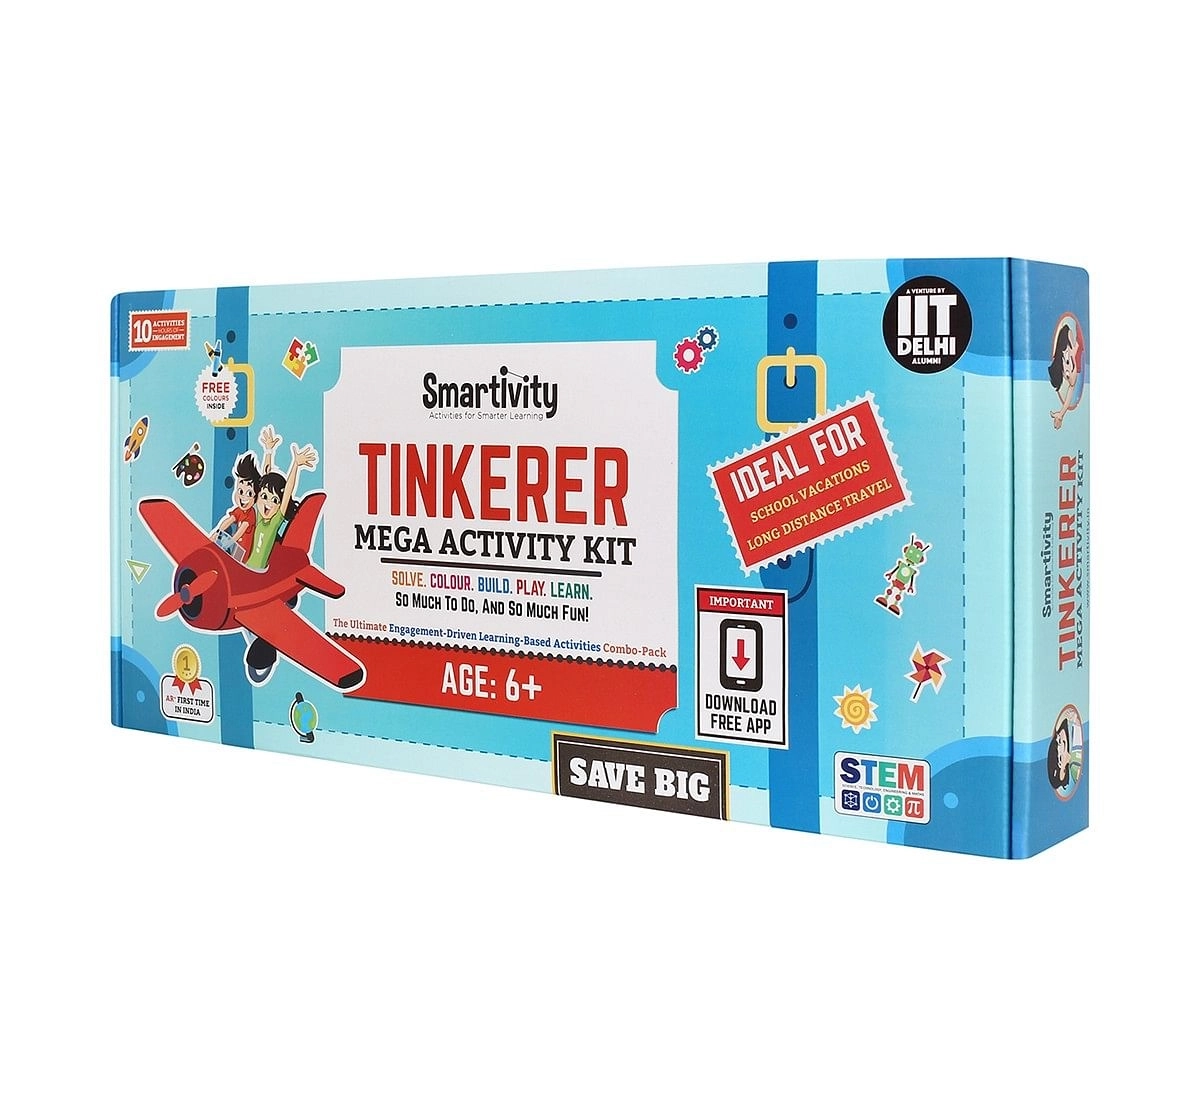 Smartivity Mega-Activity Kit : Tinkerer Stem, Diy, Educational, Learning, Building and Construction Toy for Kids age 6Y+ 